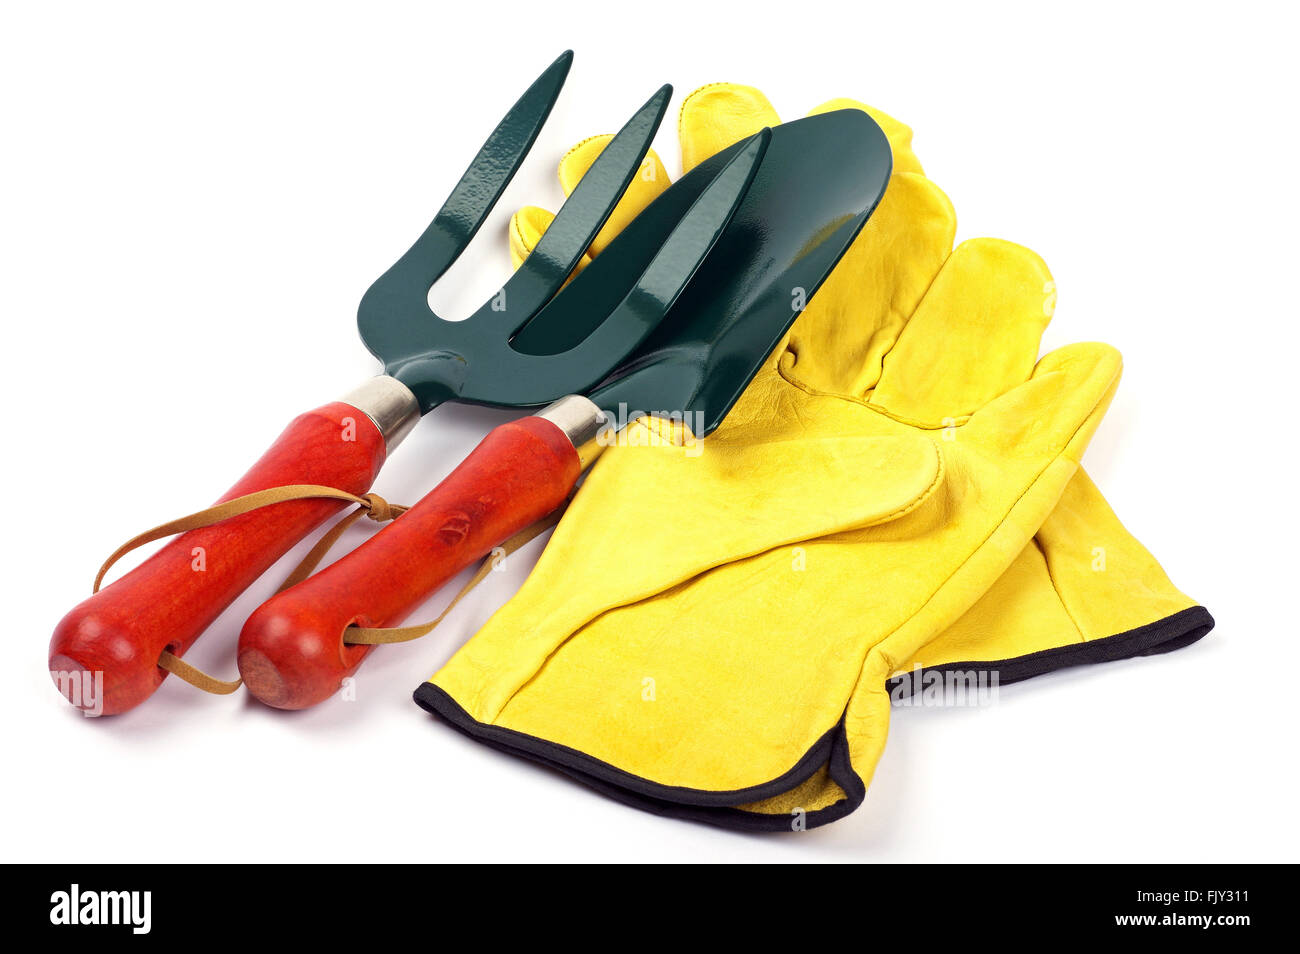 garden trowel and fork with leather gardening gloves side by side on a white background Stock Photo